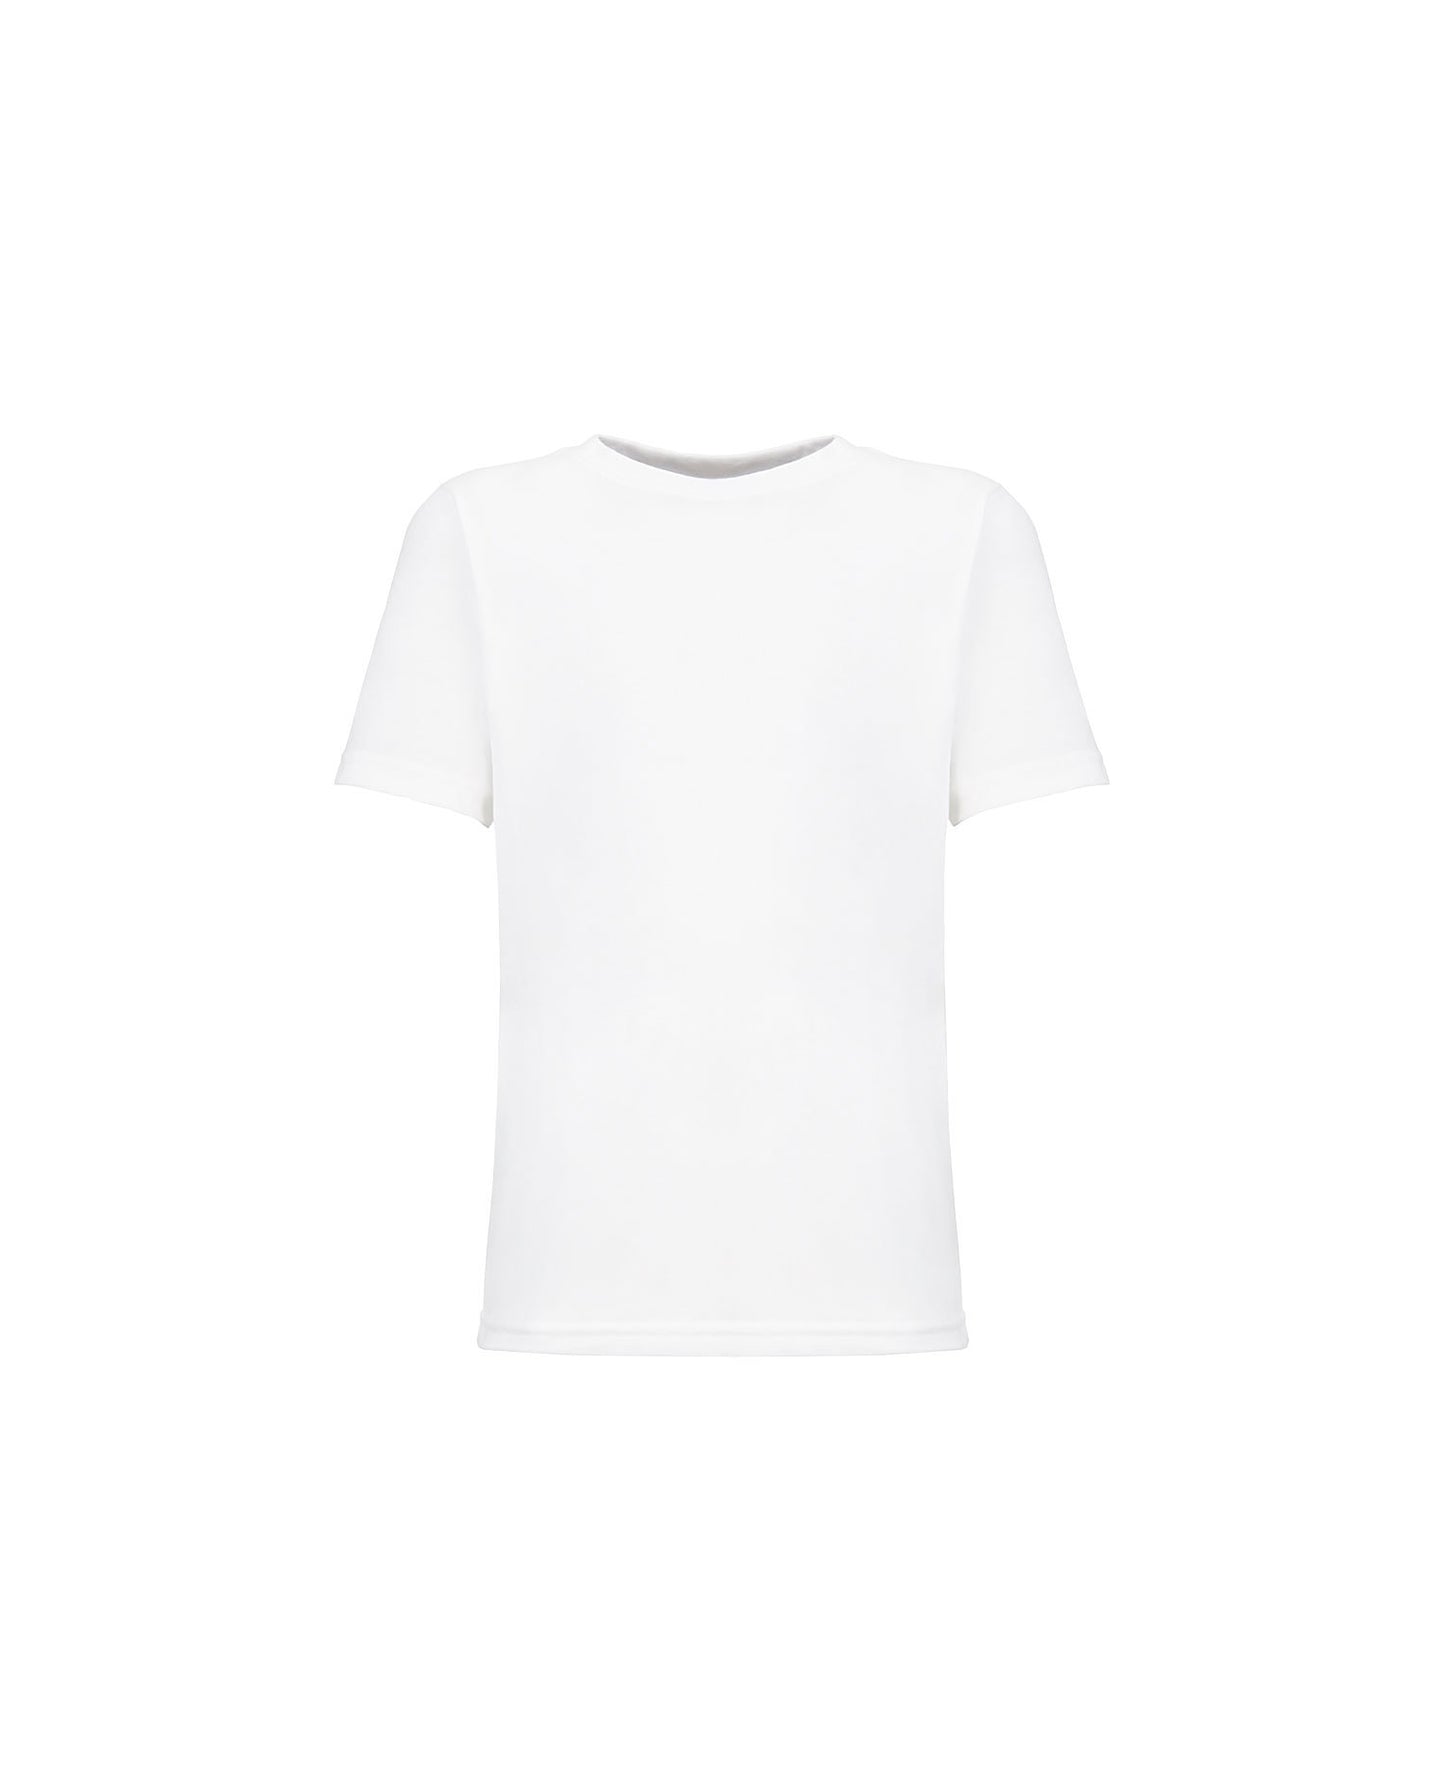 Bella + Canvas Youth Tee - White